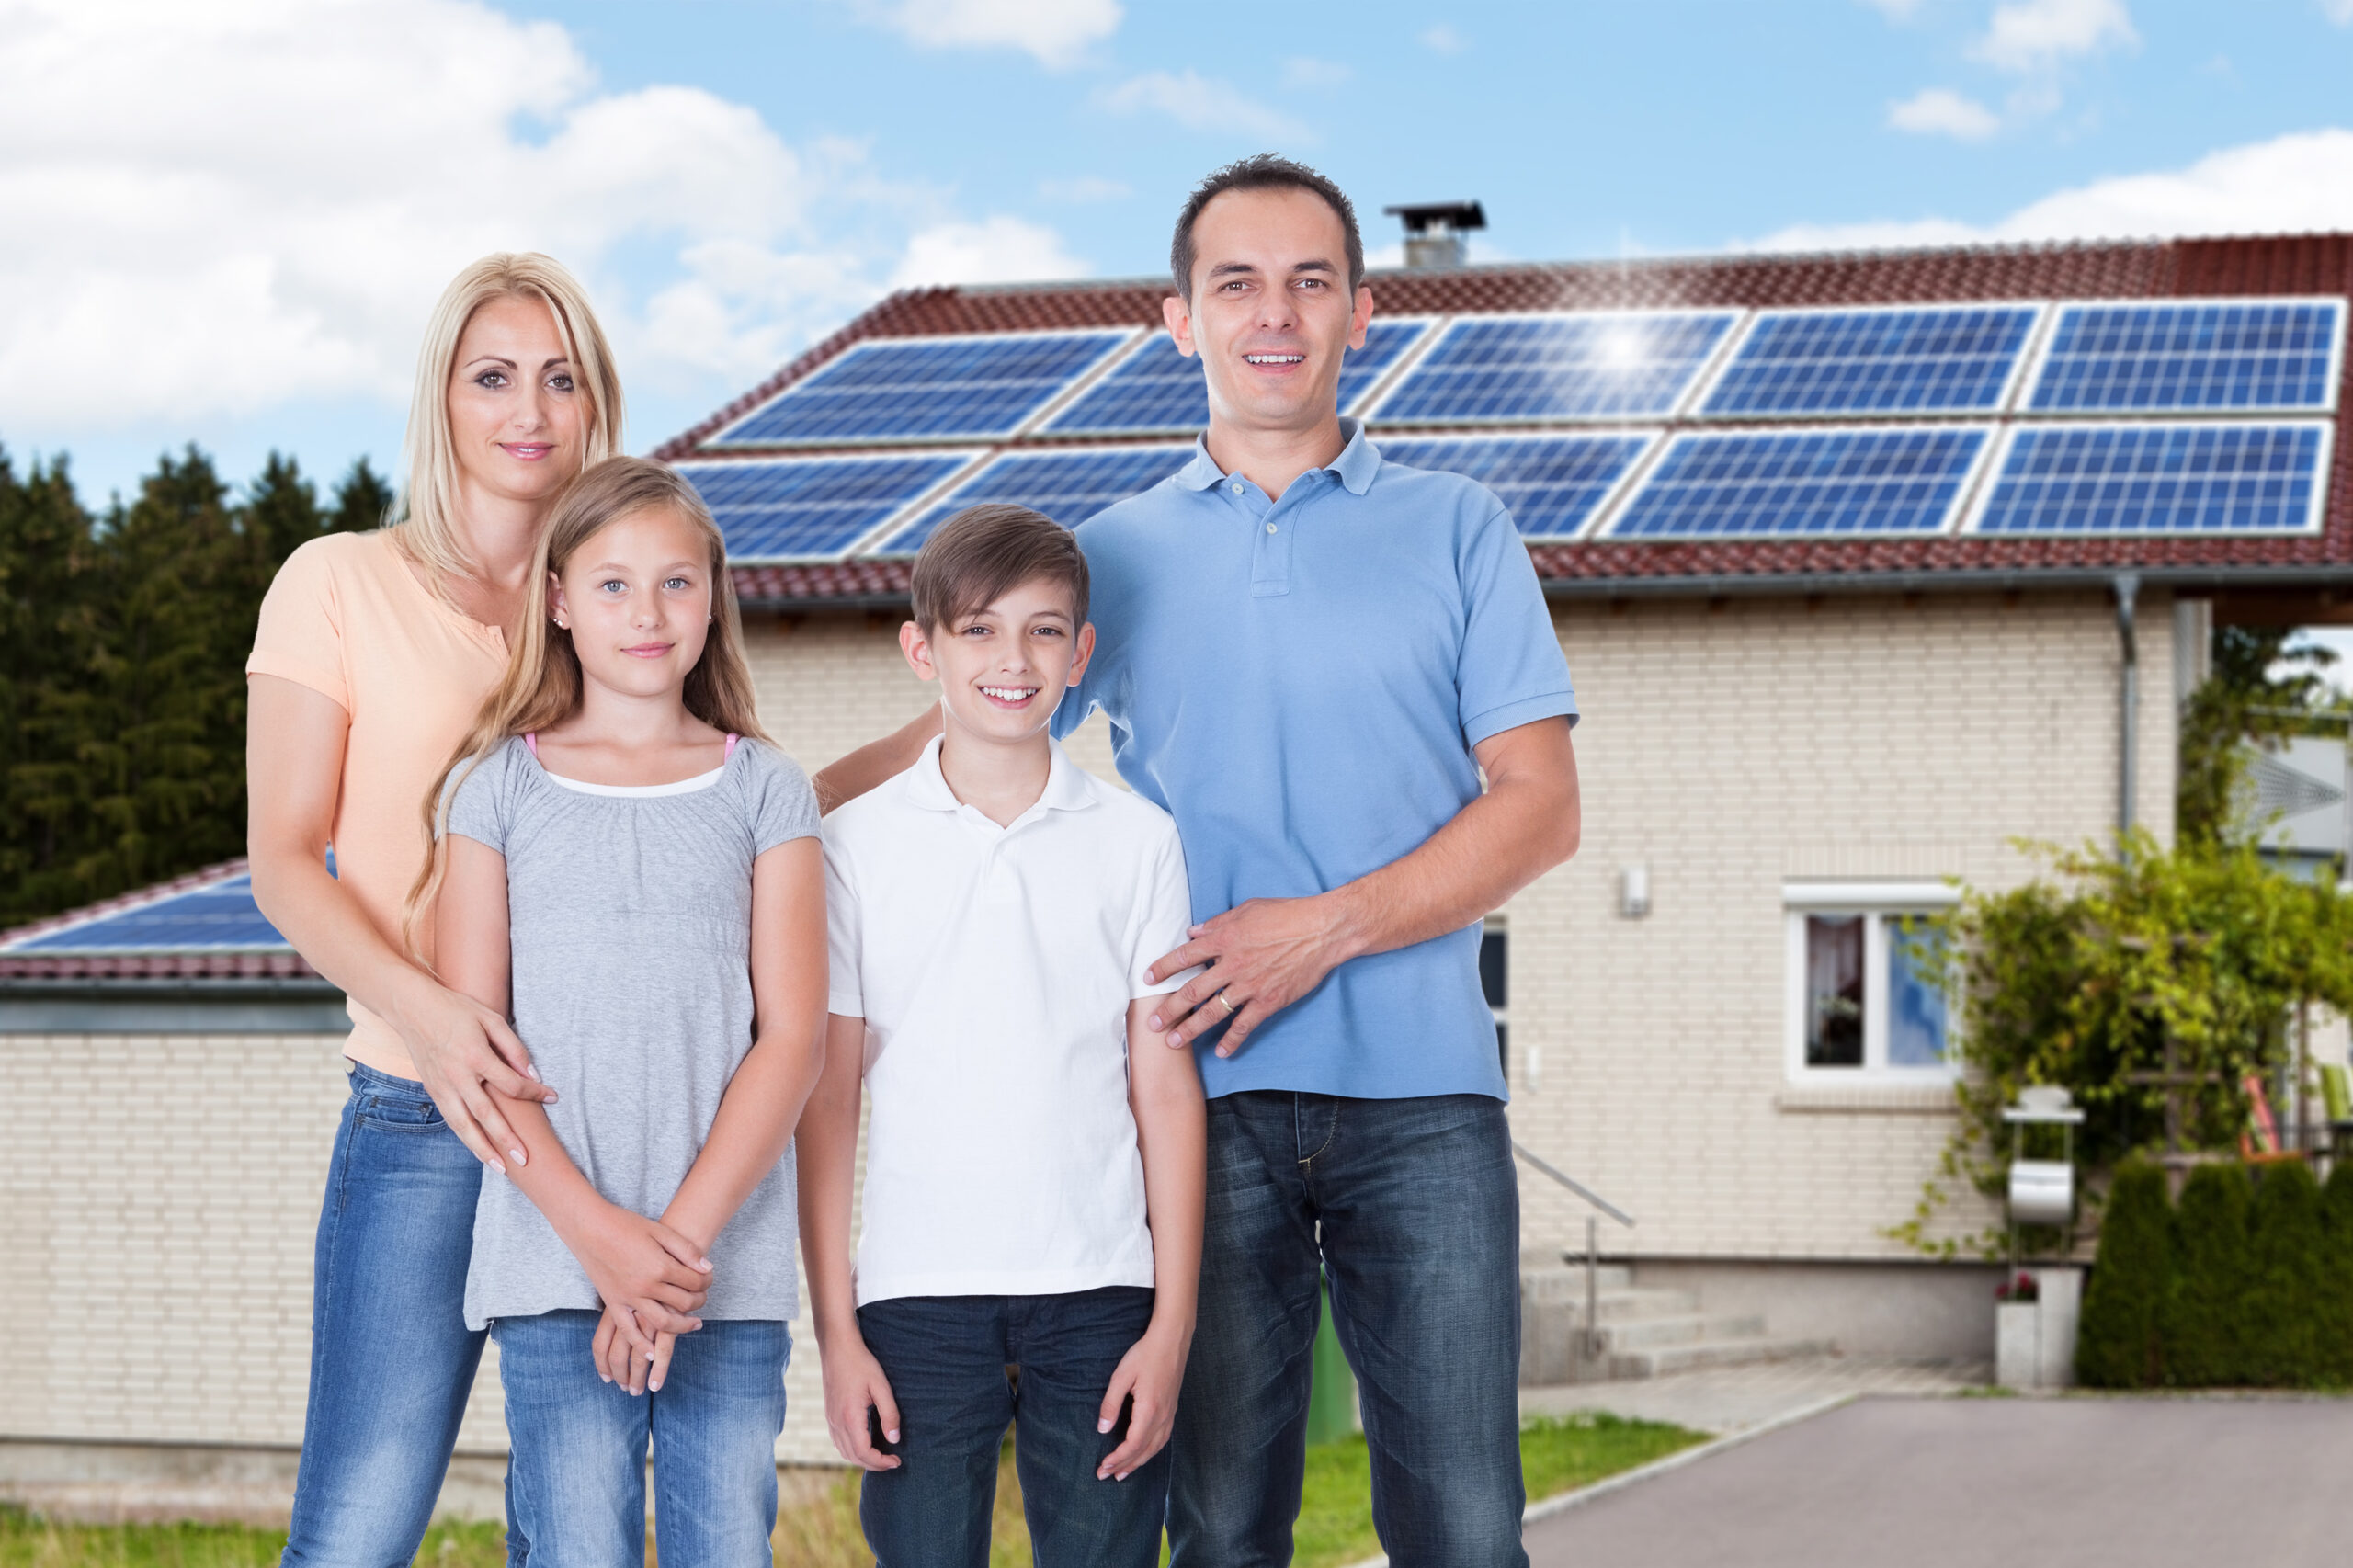 Benefits of Solar Energy for residential and commercial properties in NSW Australia